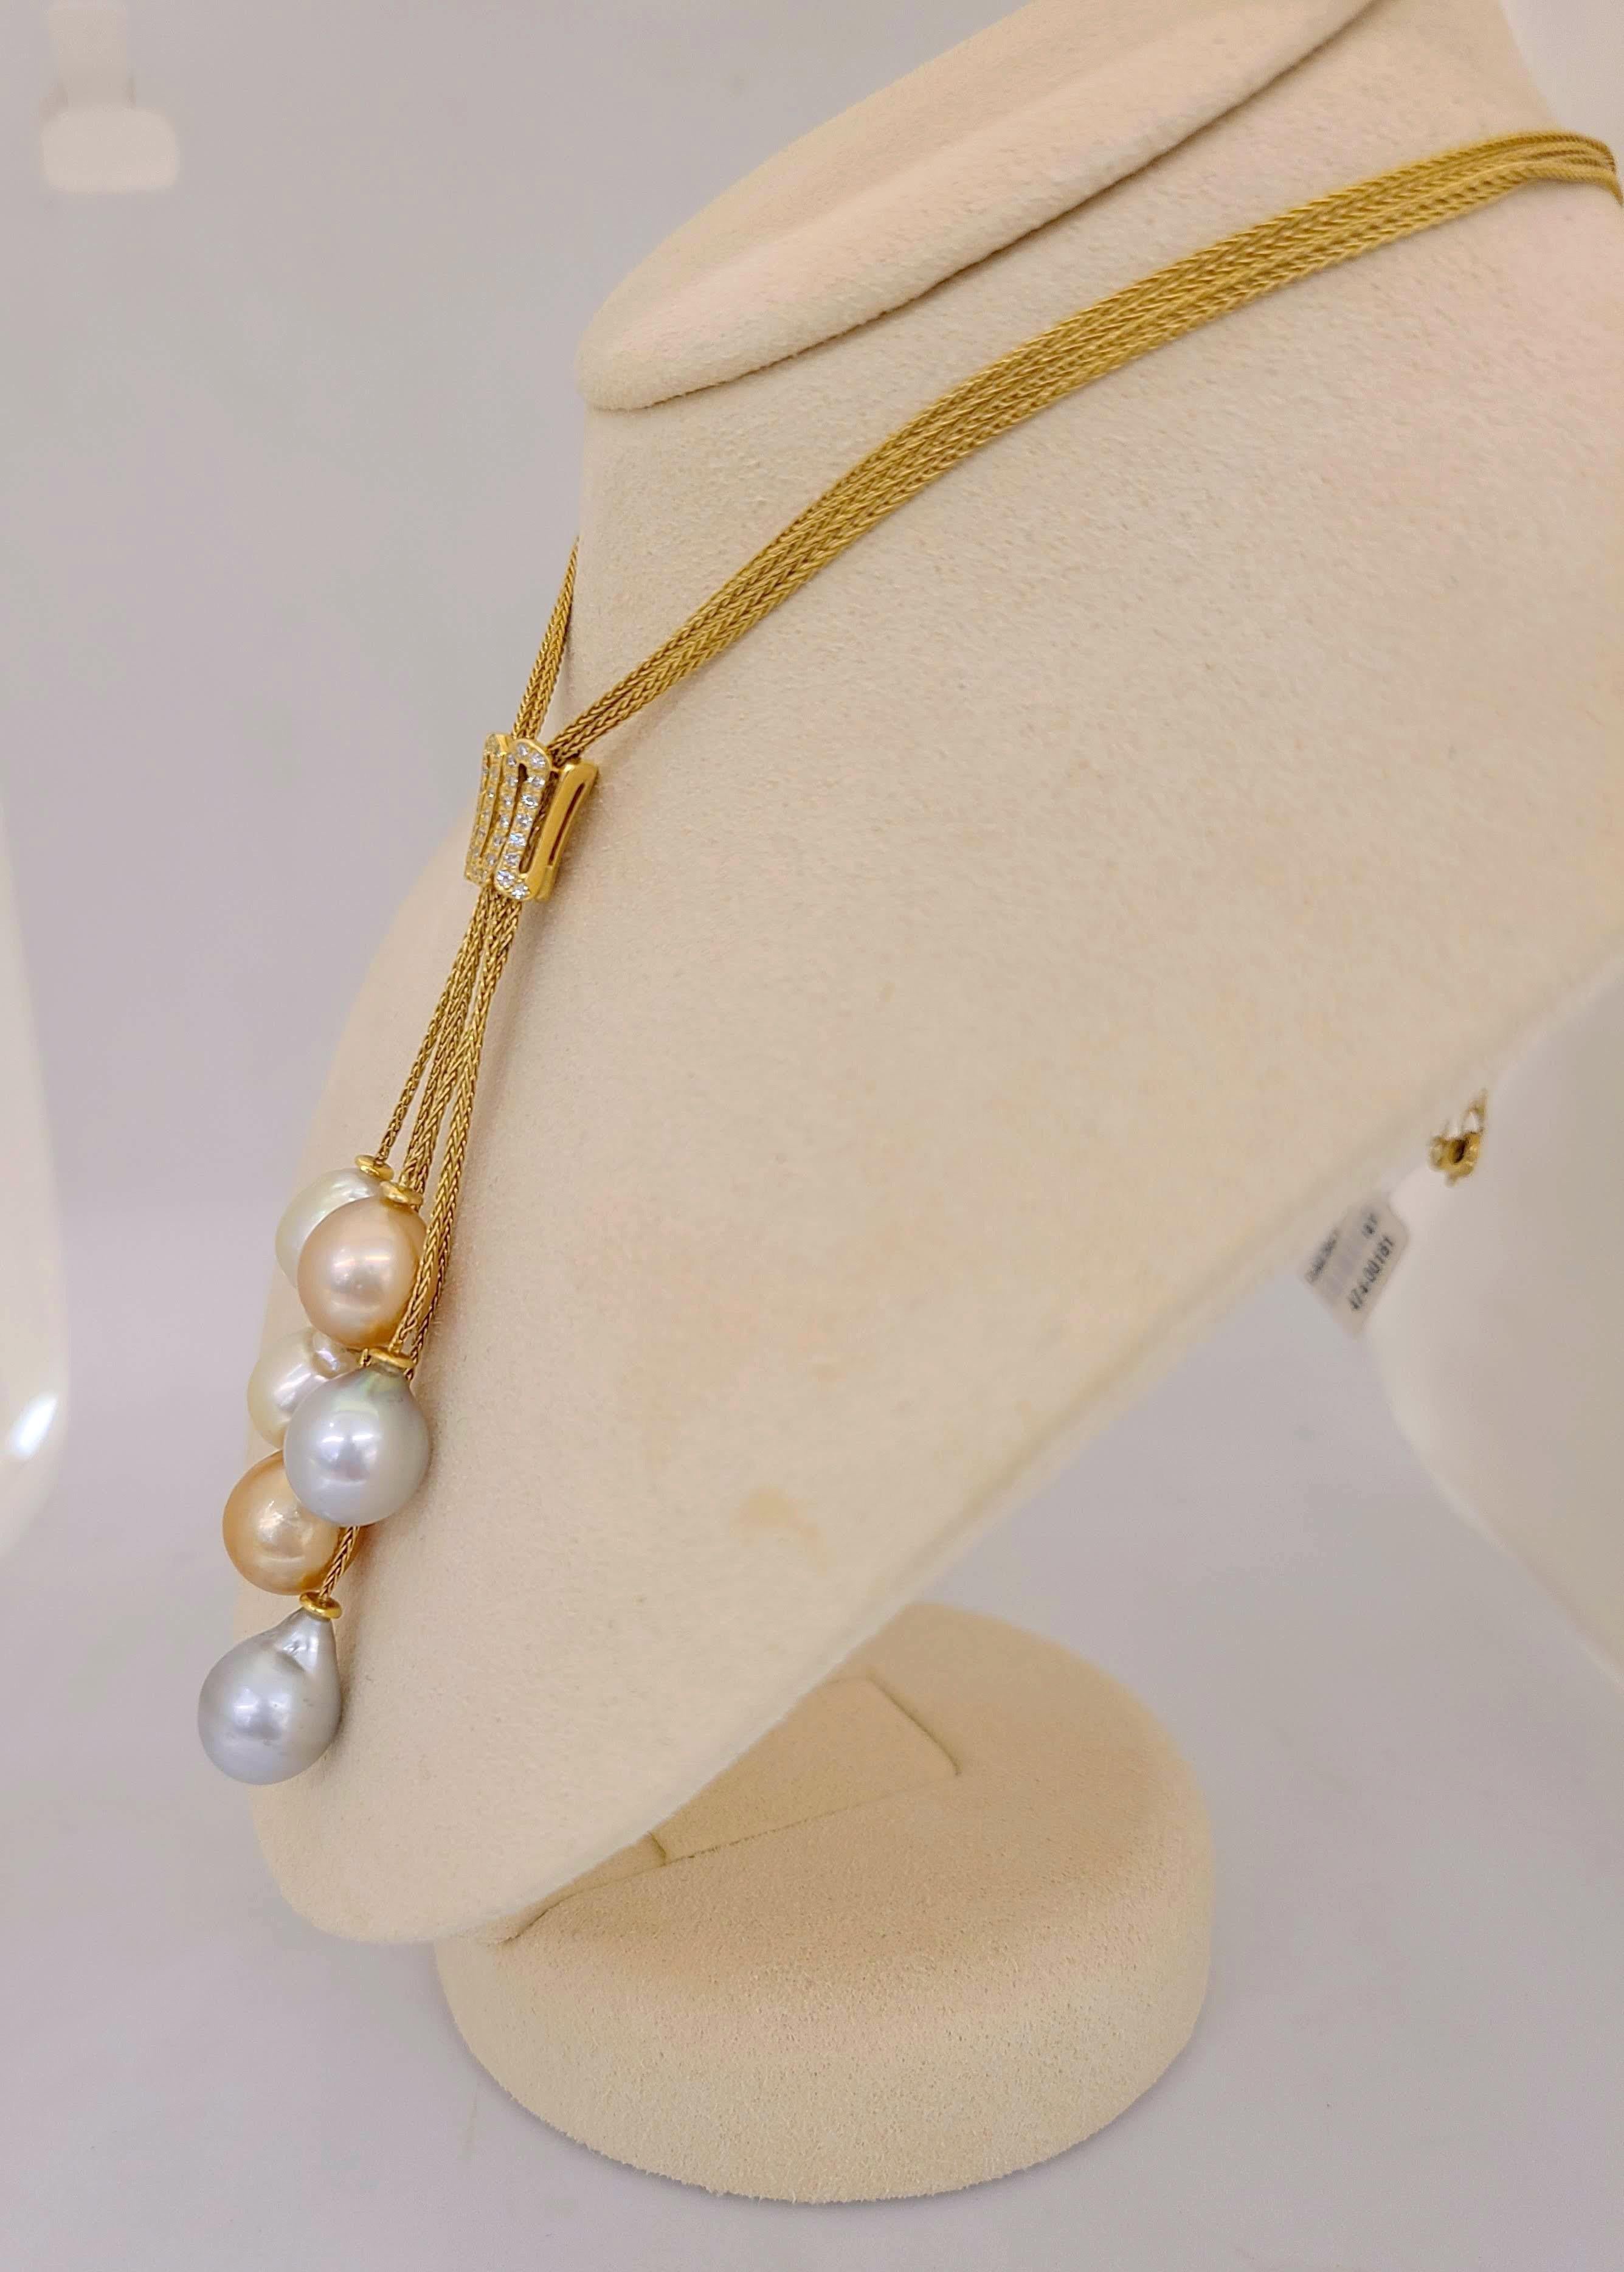 Rare organic pearls are Yvel's signature design. Cellini Jewelers NYC presents their 18 karat yellow gold necklace with six multi color drop shaped South Sea Pearls. The 23